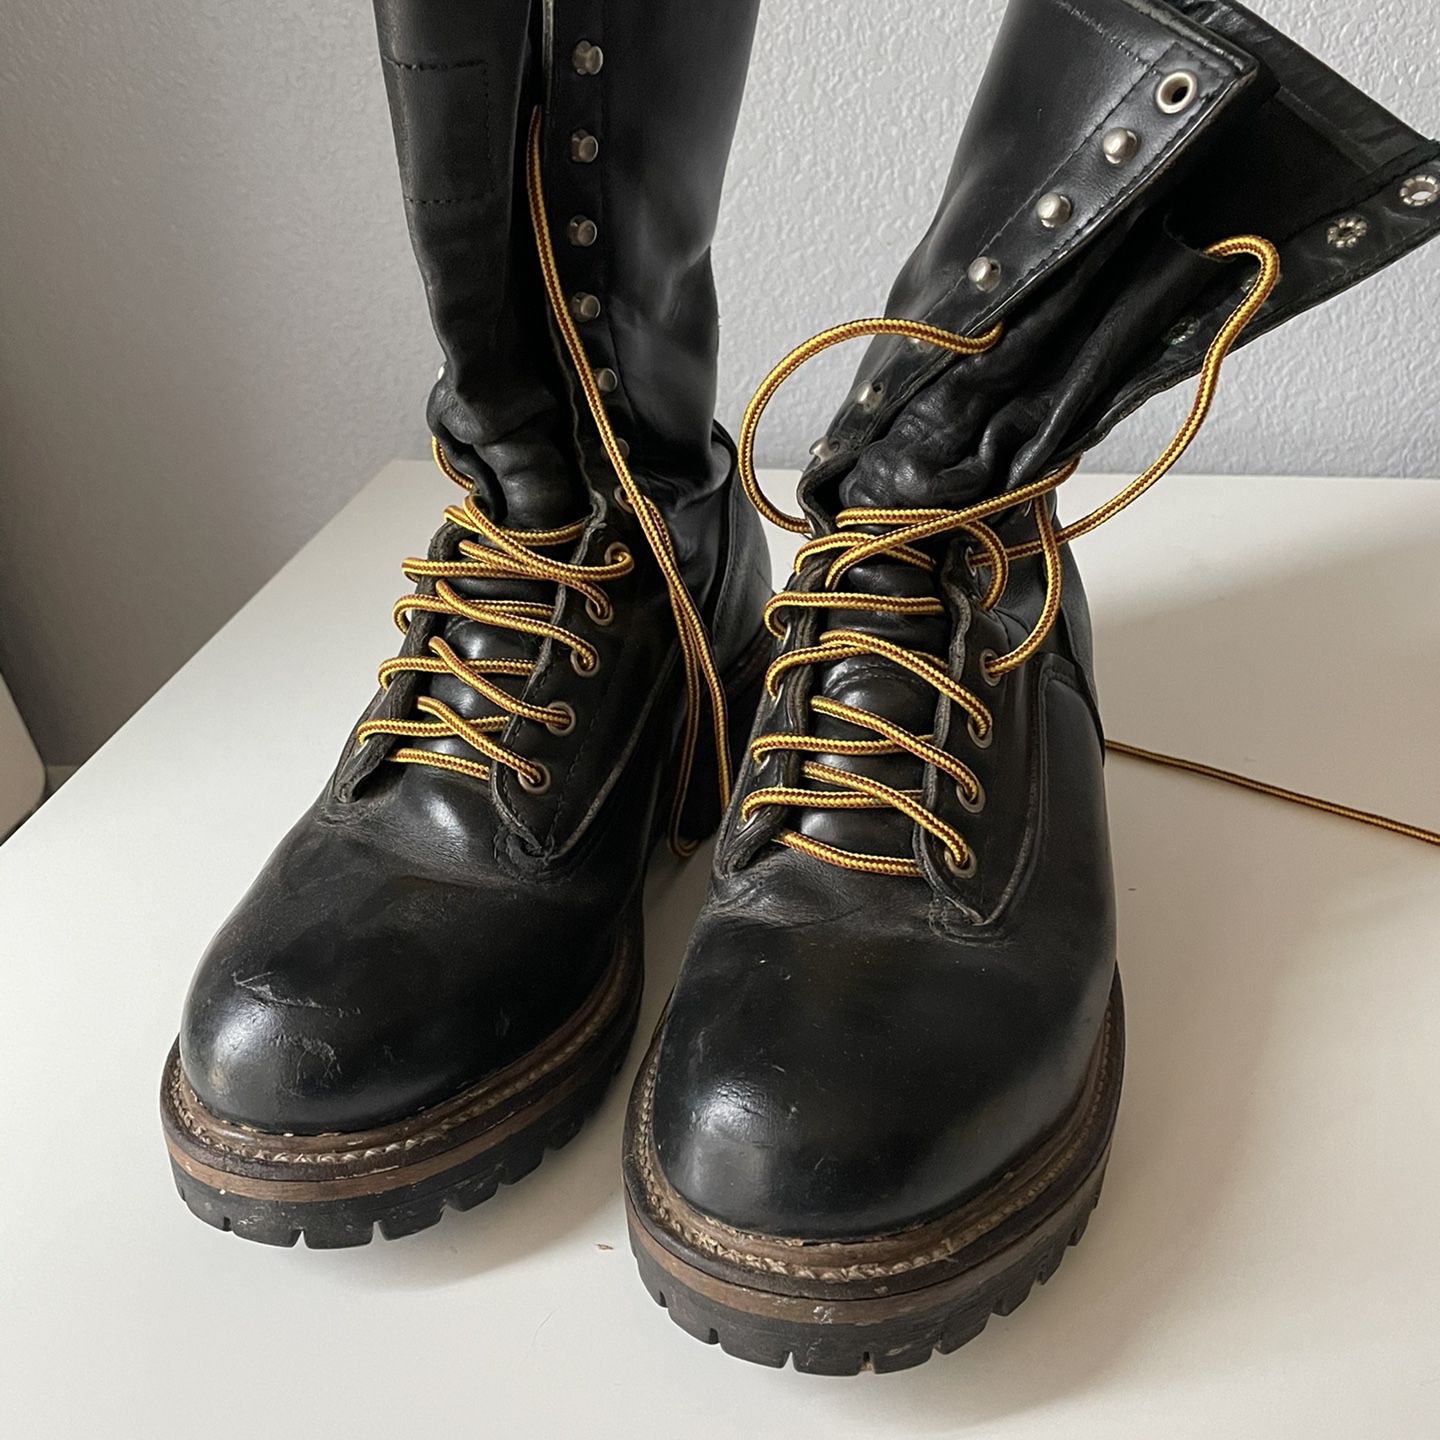 Red Wing Lineman / Logger Boots